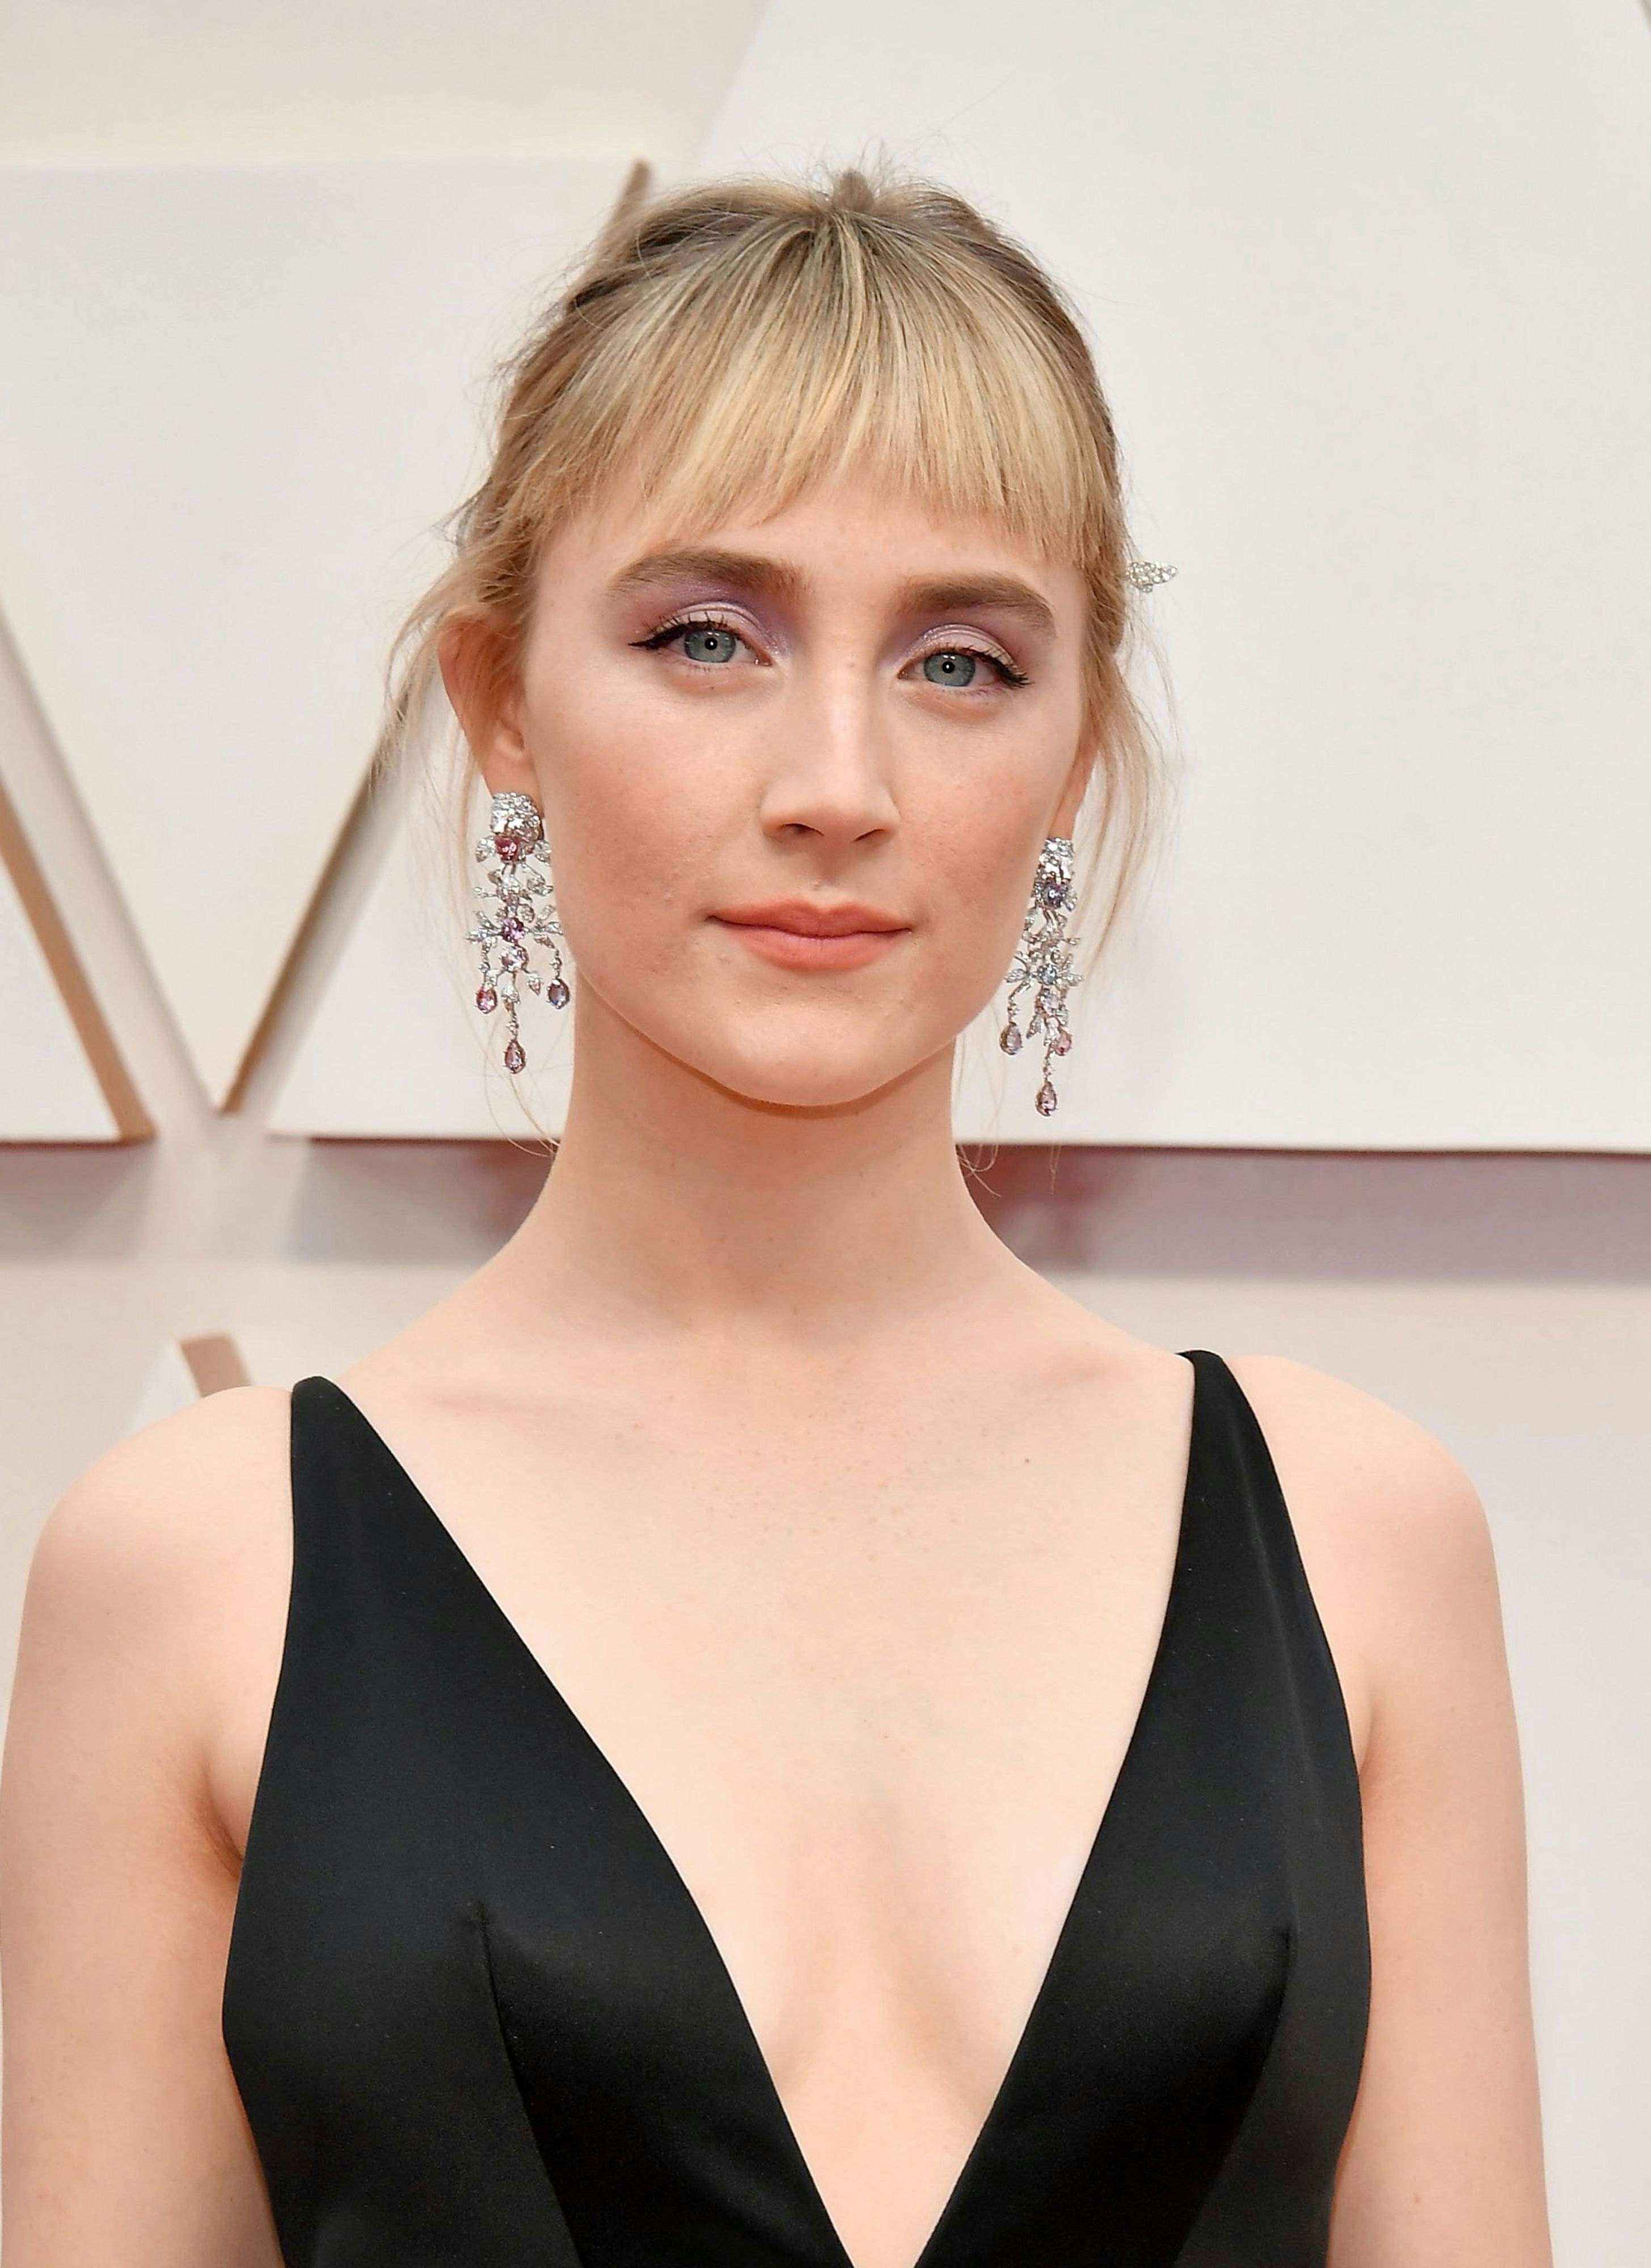 The Best Beauty Looks At The 2020 Oscars Are Some Of The Most